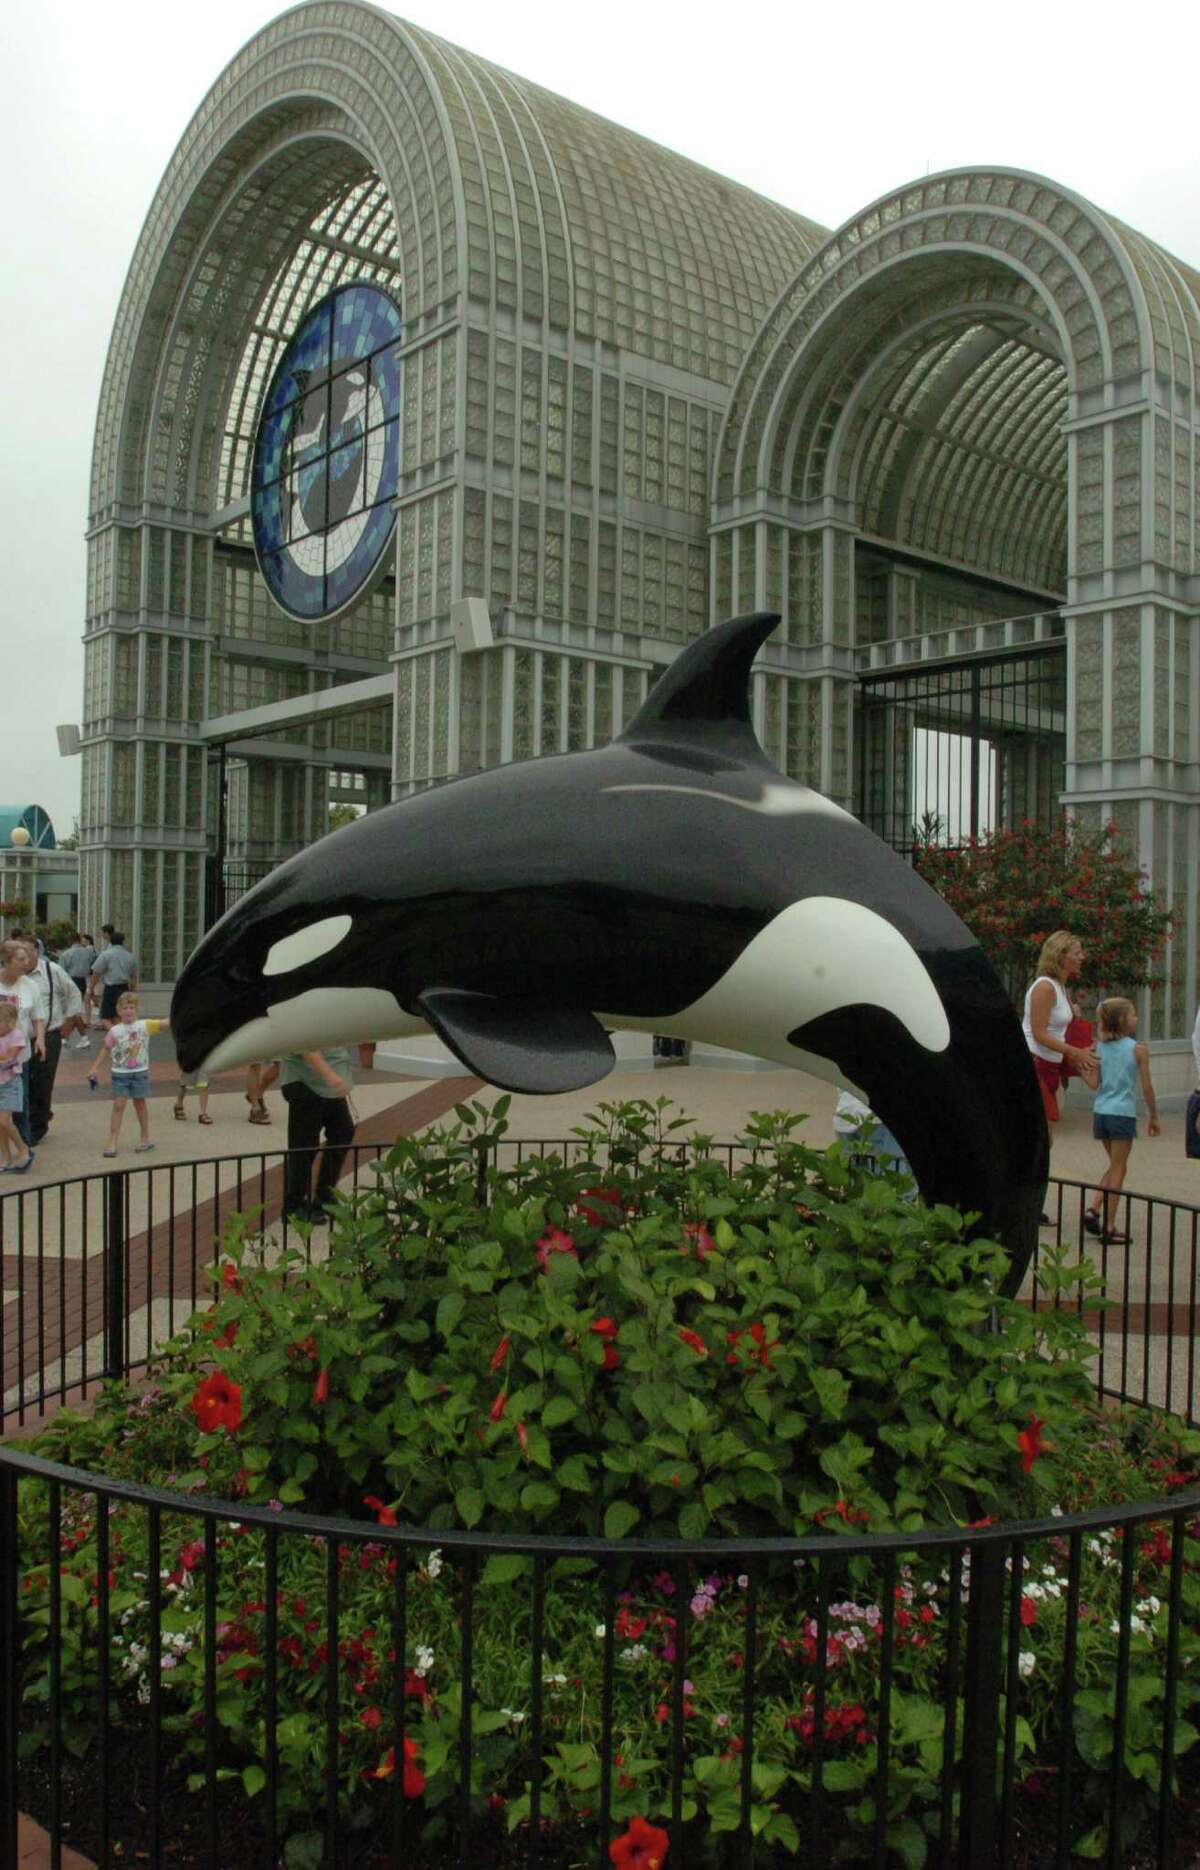 SeaWorld celebrated its 50th anniversary Friday, March 21, and we've compiled memorable moments since the San Antonio park opened 26 years ago. Click through the photos to see the following moments in photos.